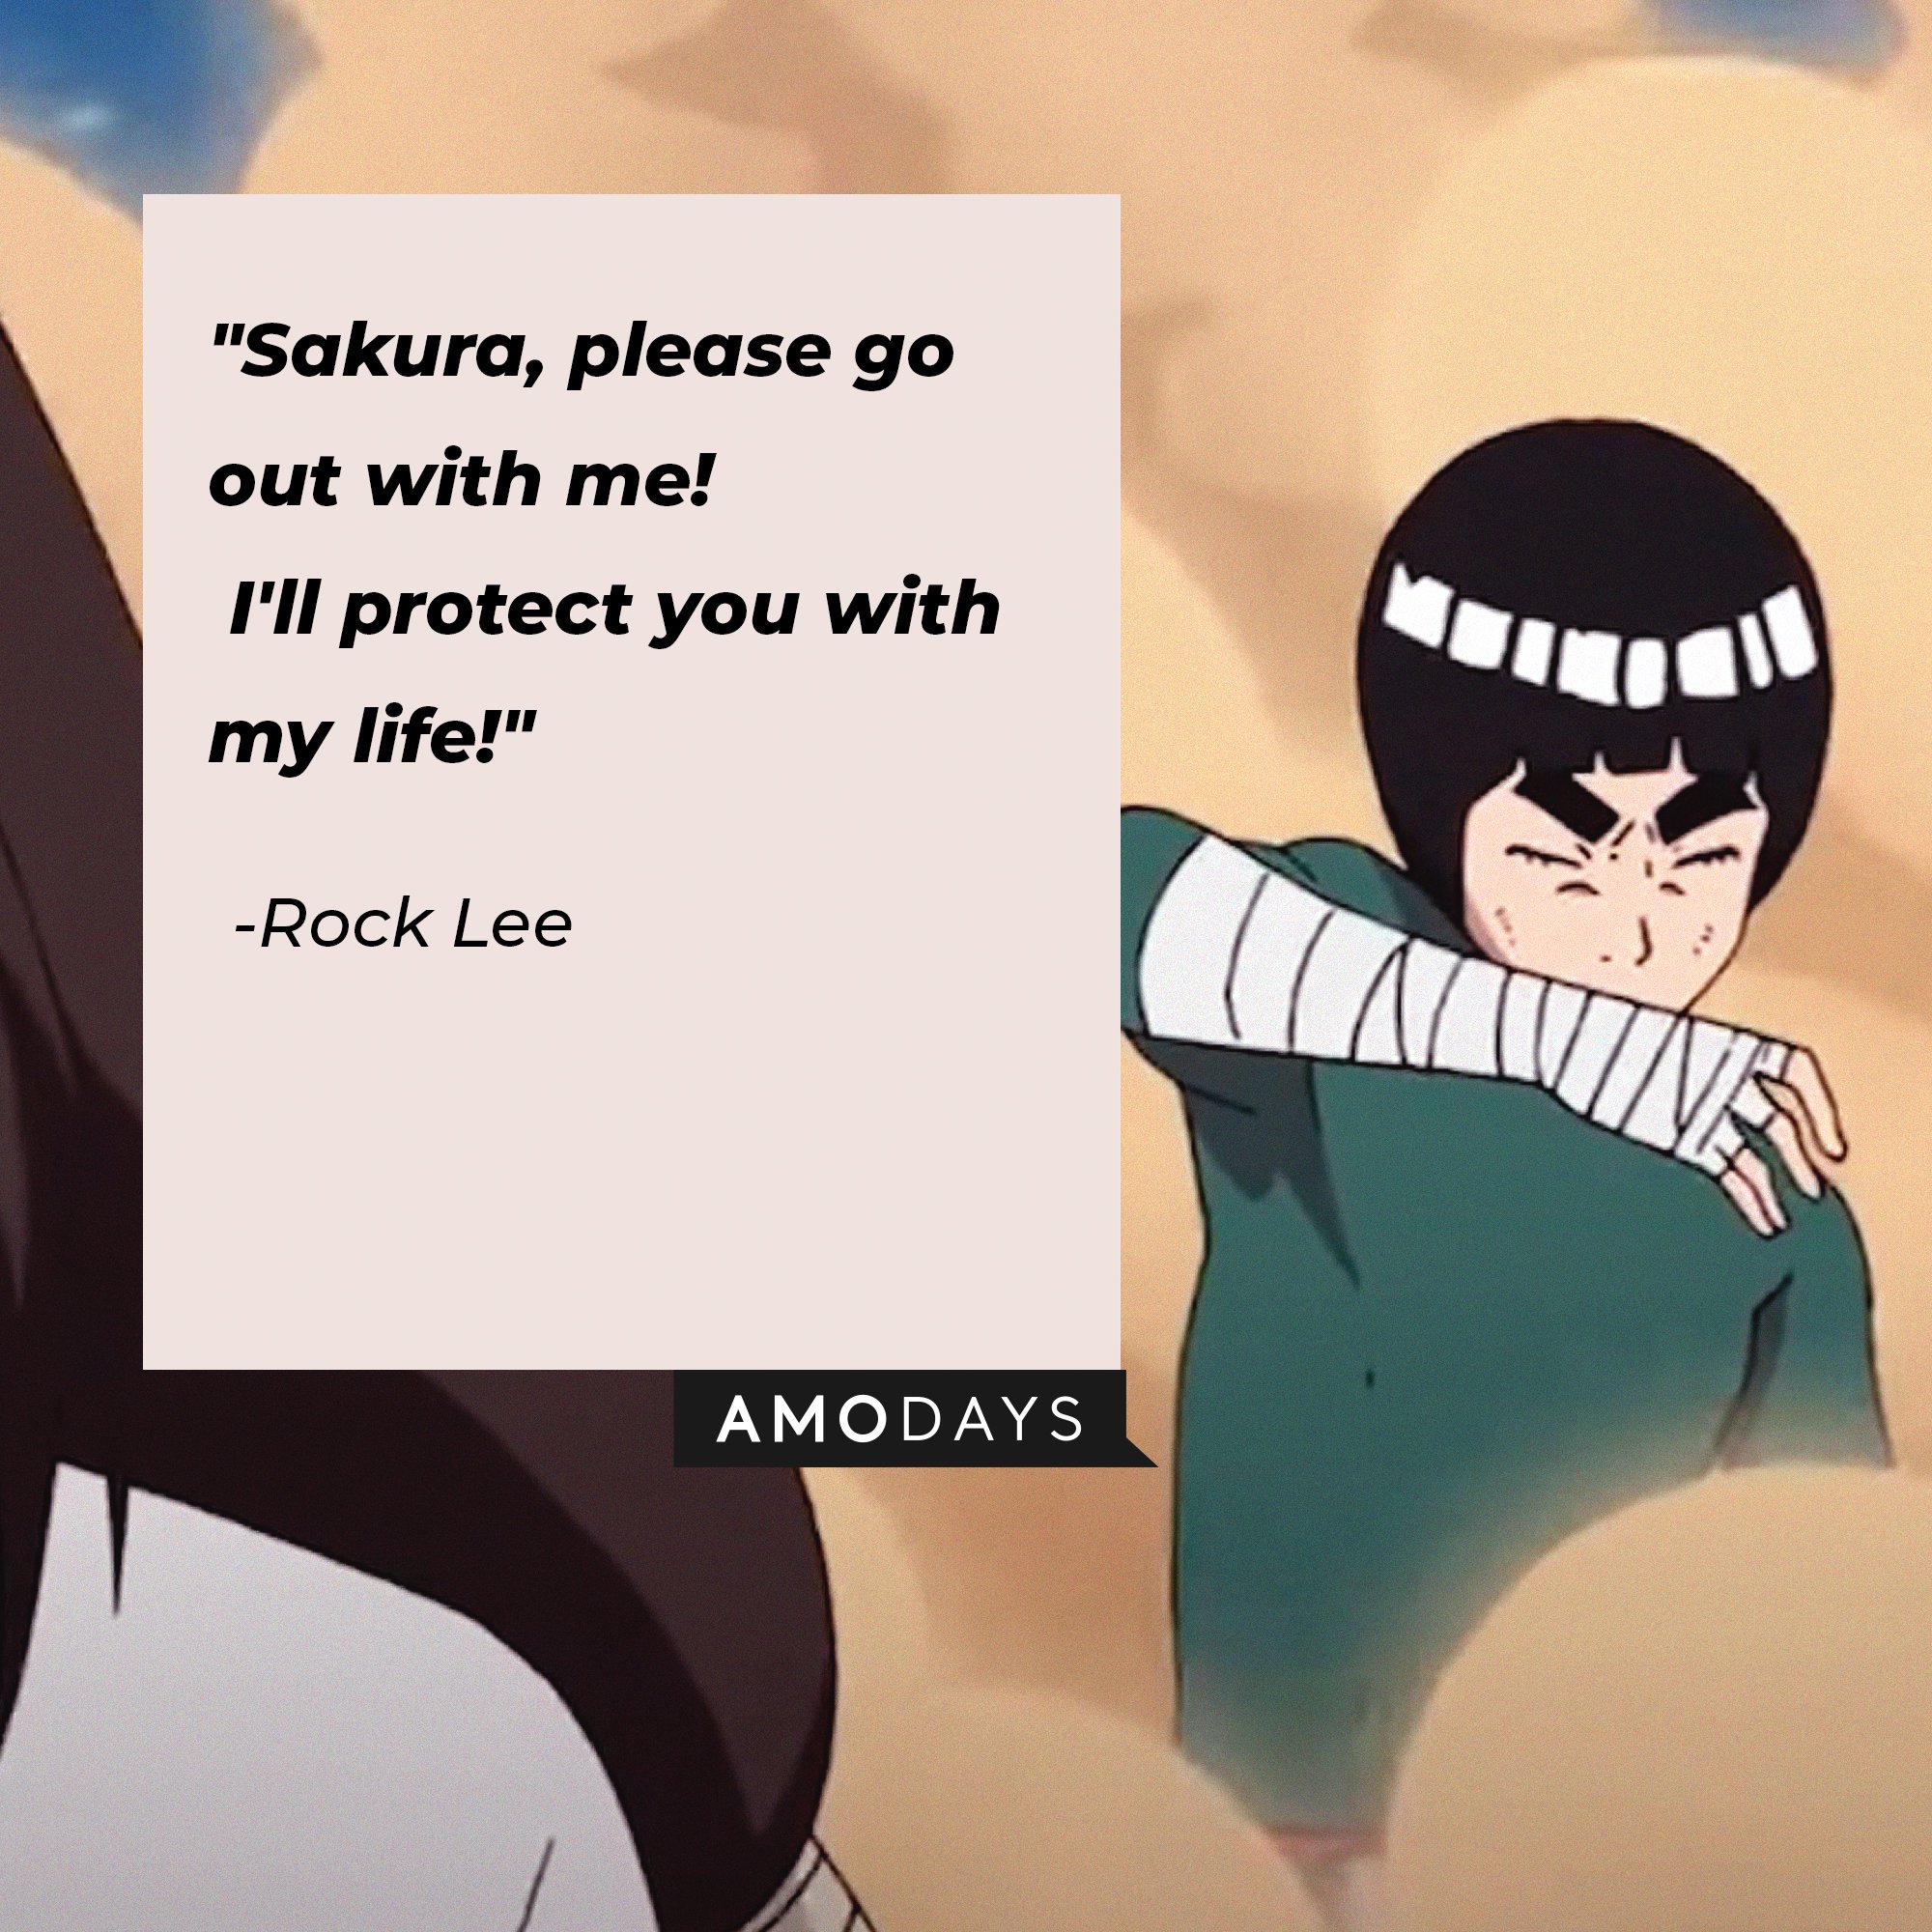 Rock Lee's quote: "Sakura, please go out with me! I'll protect you with my life!" | Image: AmoDays